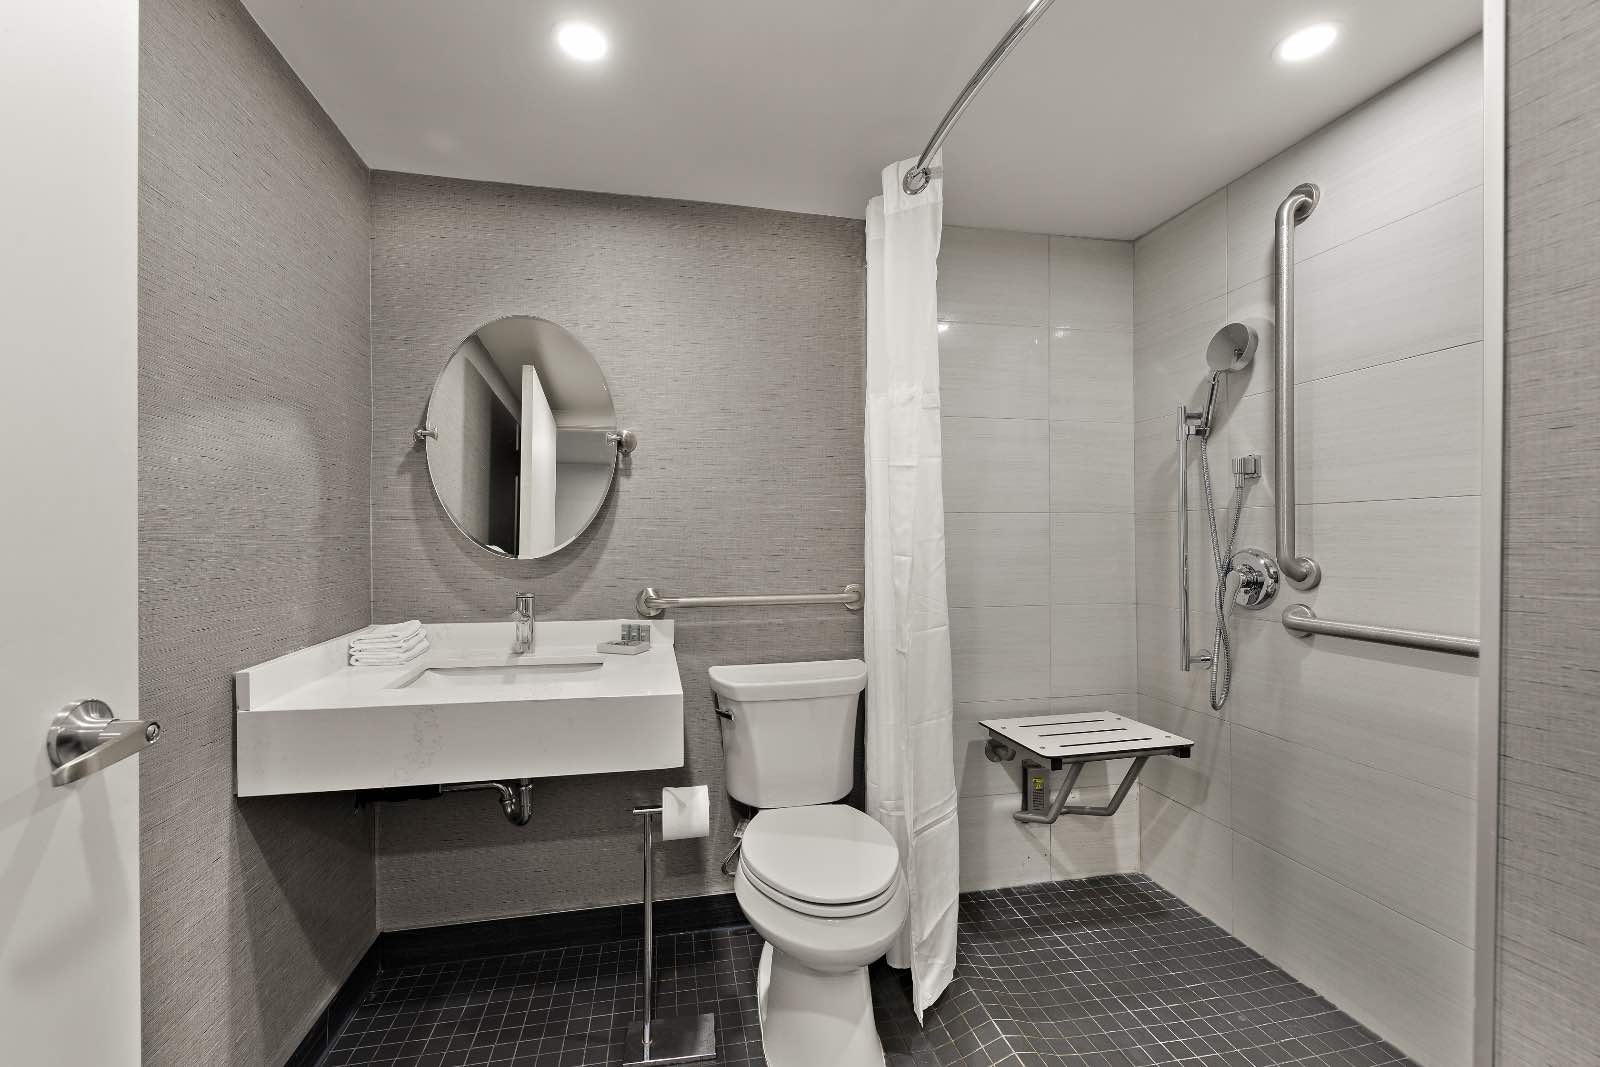 Best Western Parkway hotel room bathroom with sink, toilet and shower